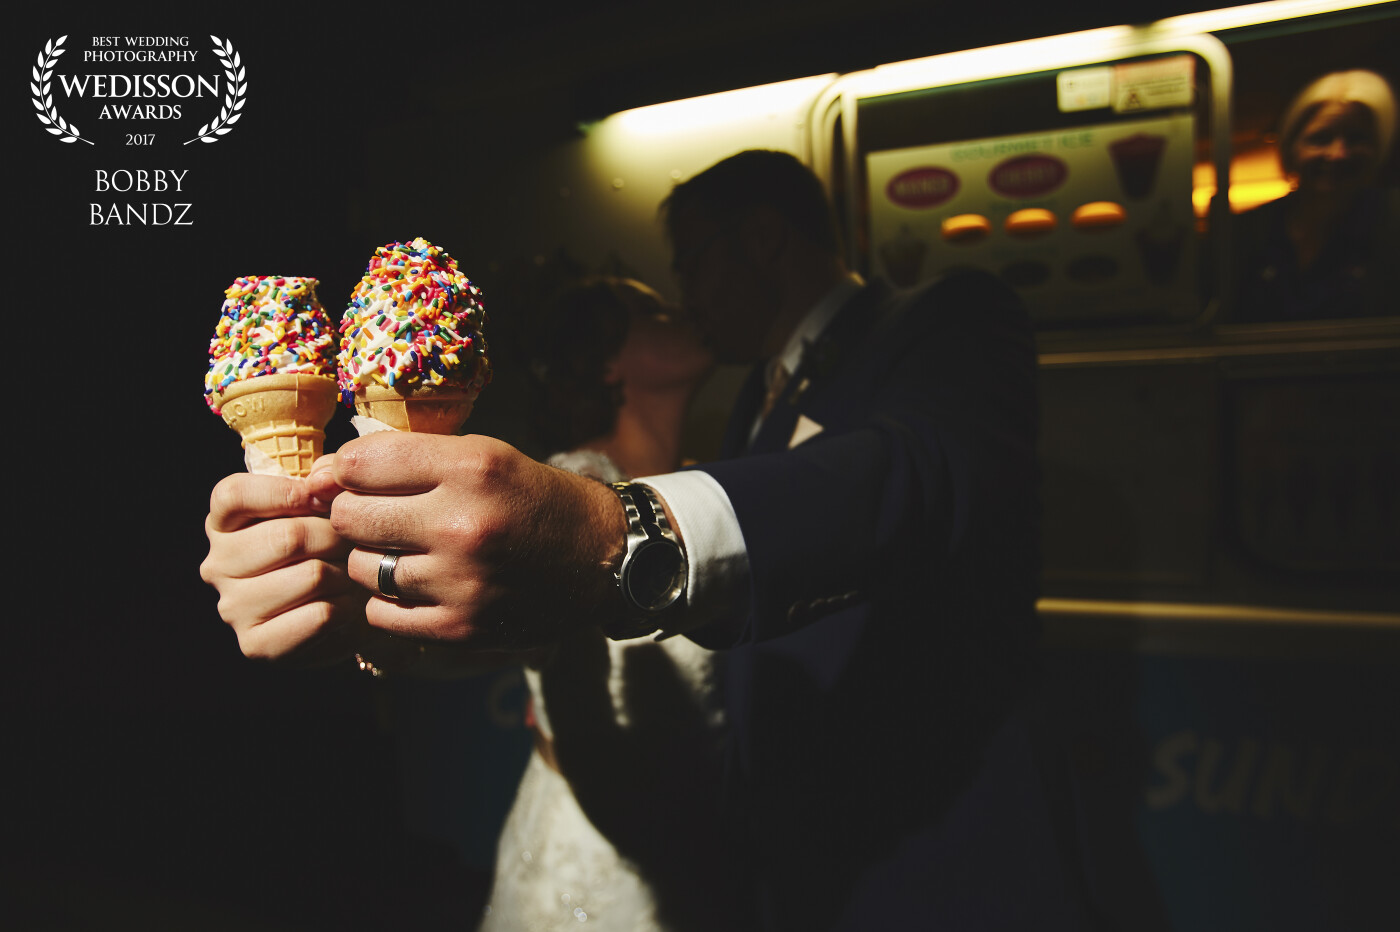 My clients didn’t do a big cake but they did have an ice cream truck outside the venue the whole night making hand made cones! They said the ice cream was good but the kiss was the sweetest part! 